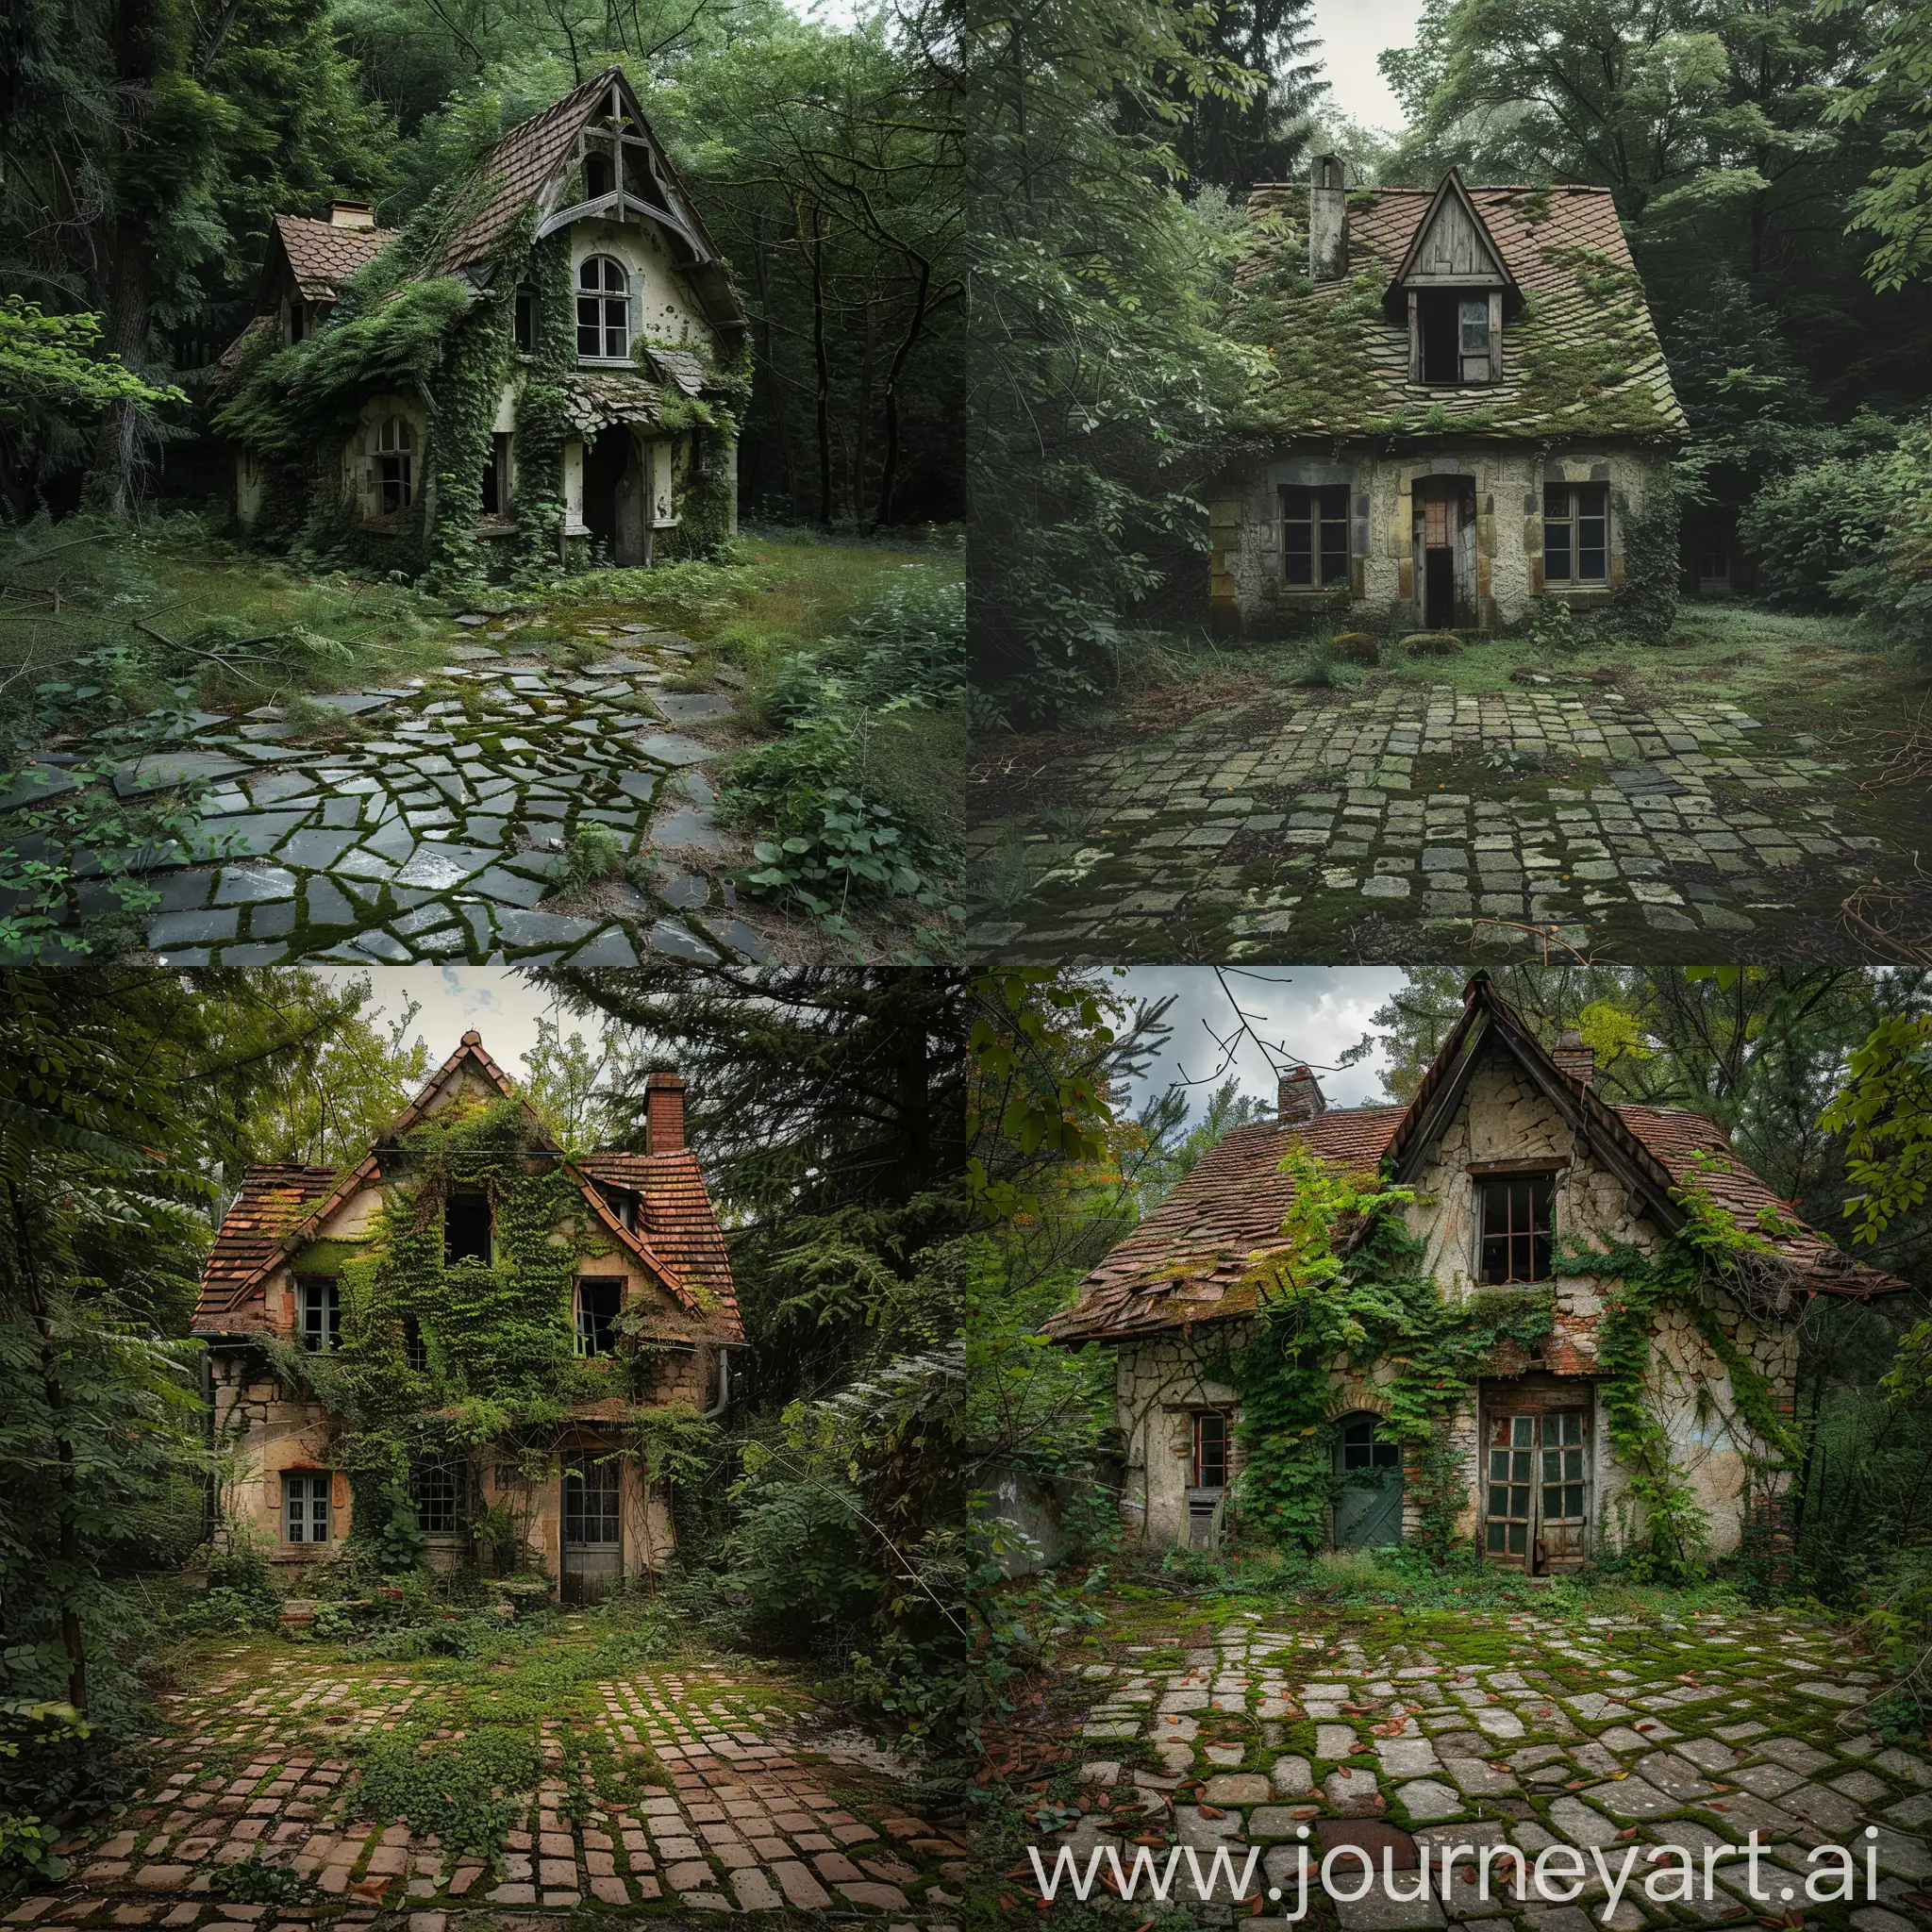 Abandoned-TwoStorey-European-House-Overgrown-with-Moss-and-Greenery